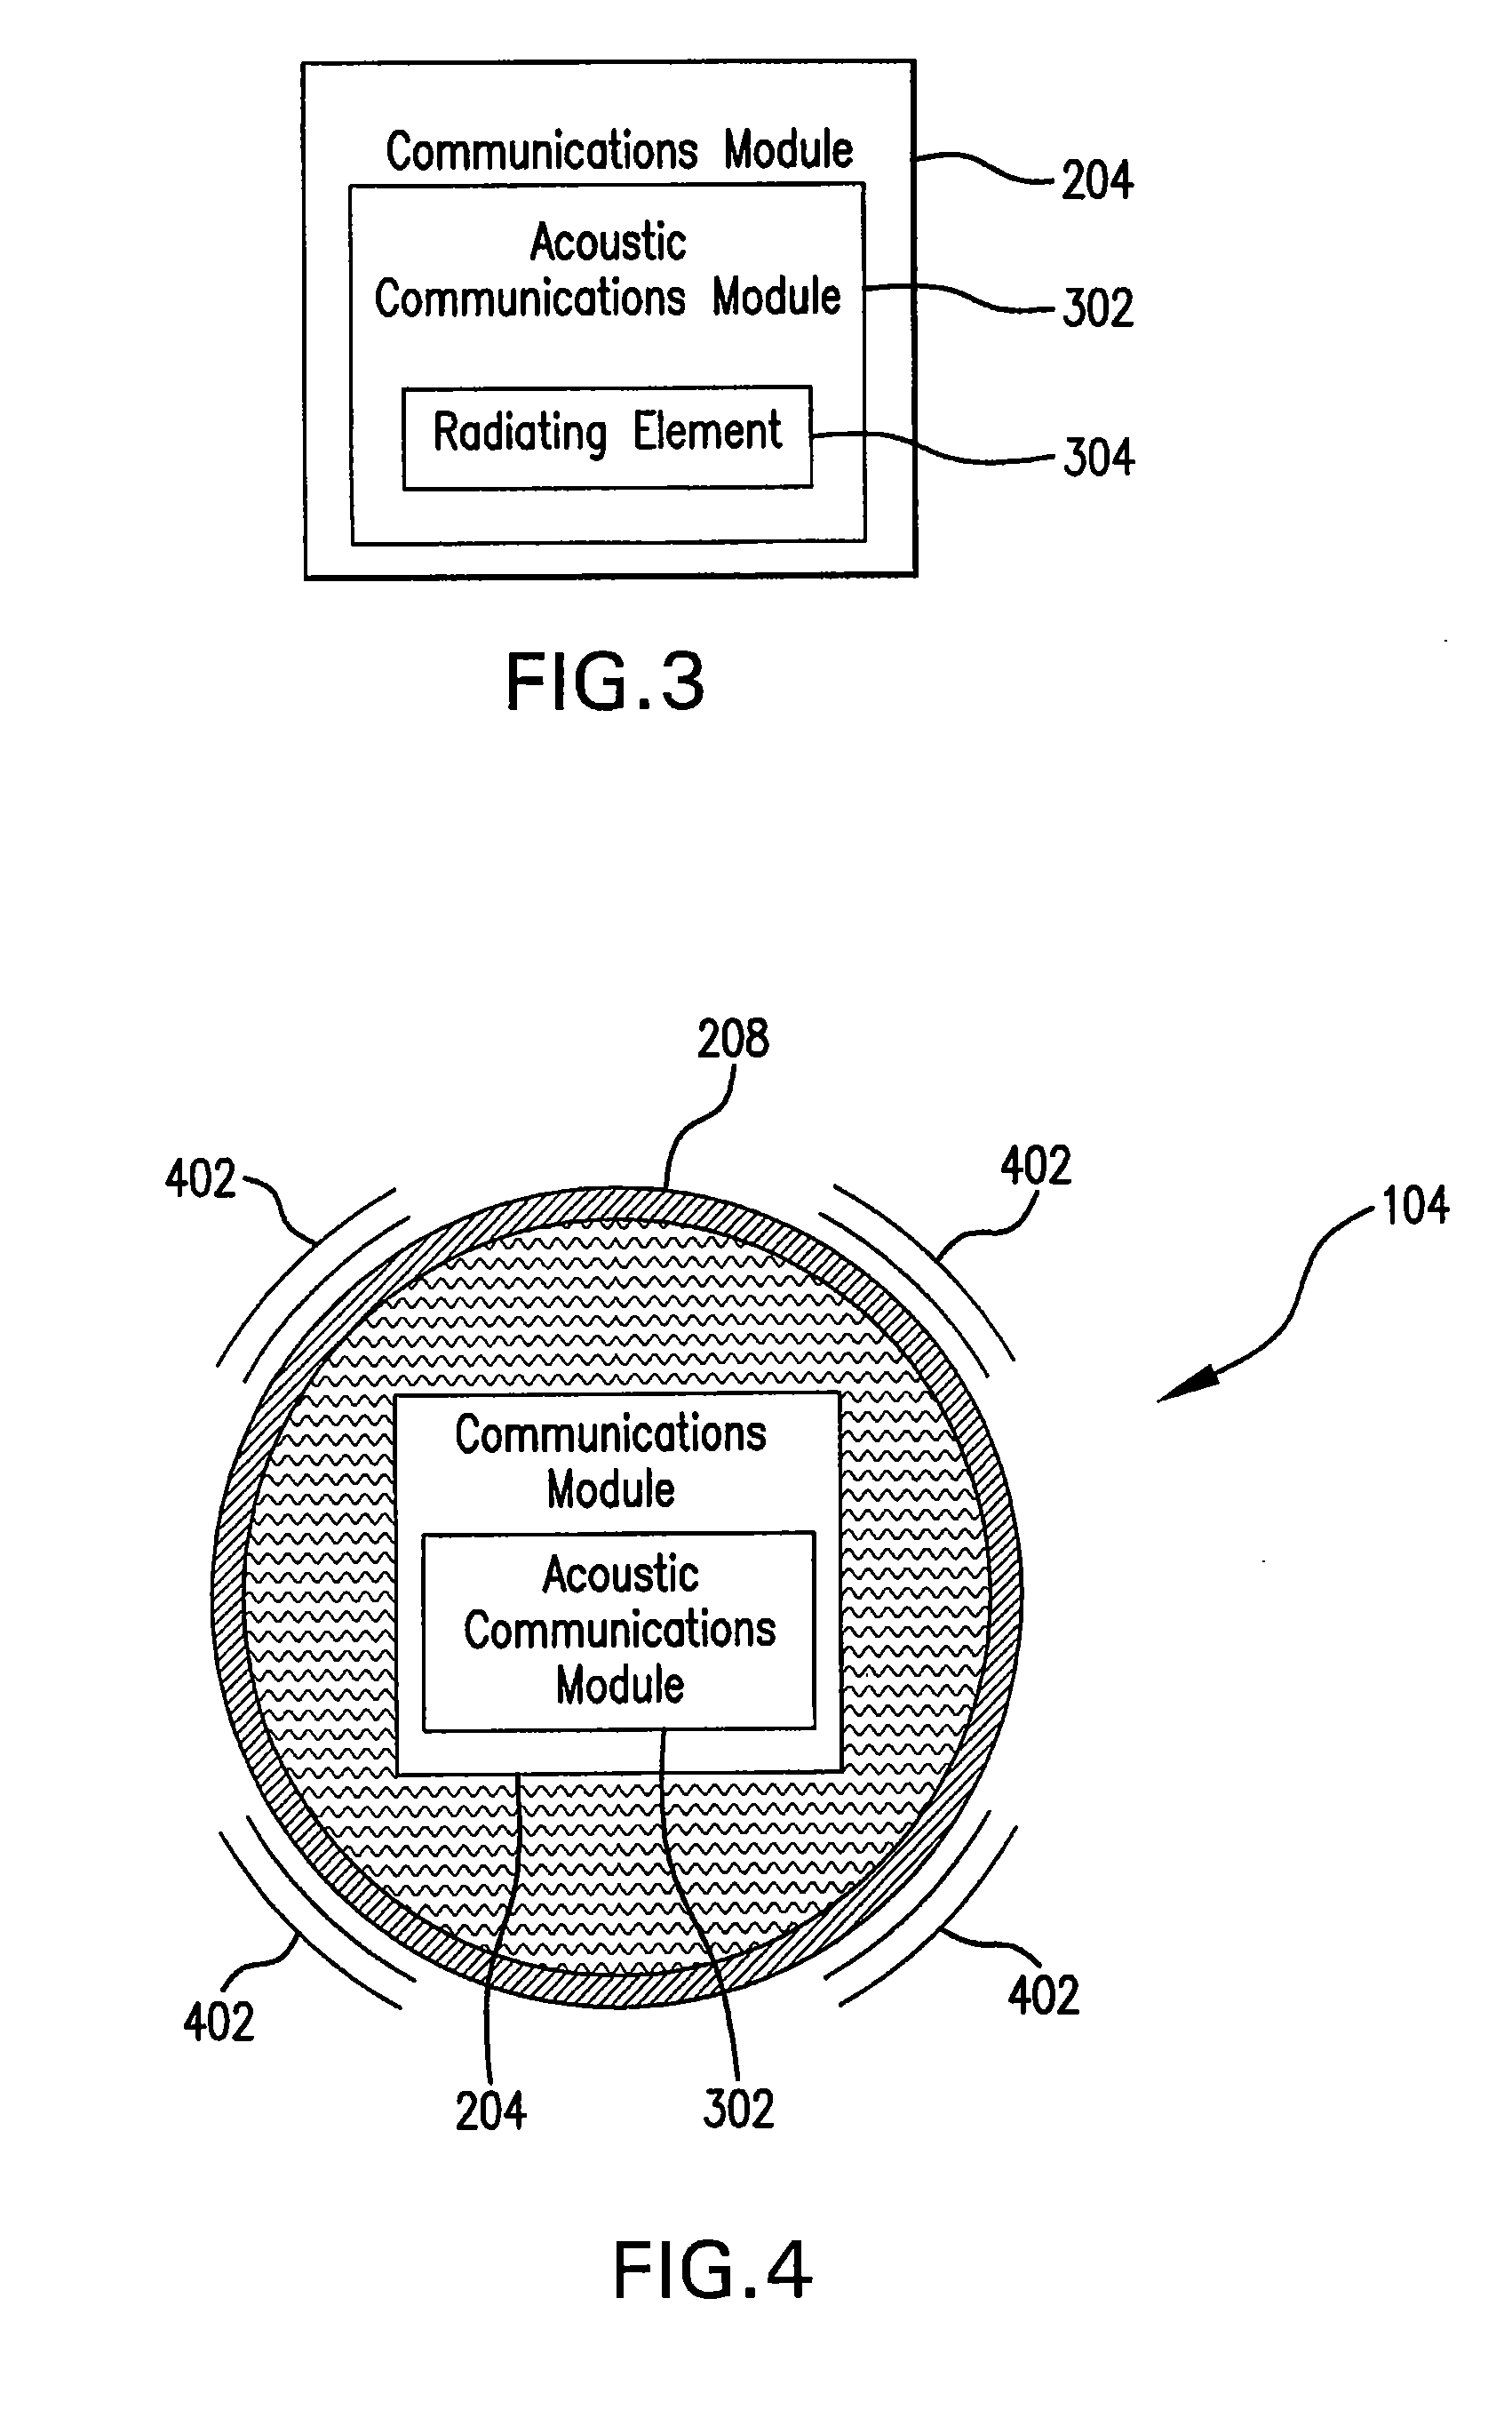 System and Method for Acoustic Information Exchange Involving an Ingestible Low Power Capsule